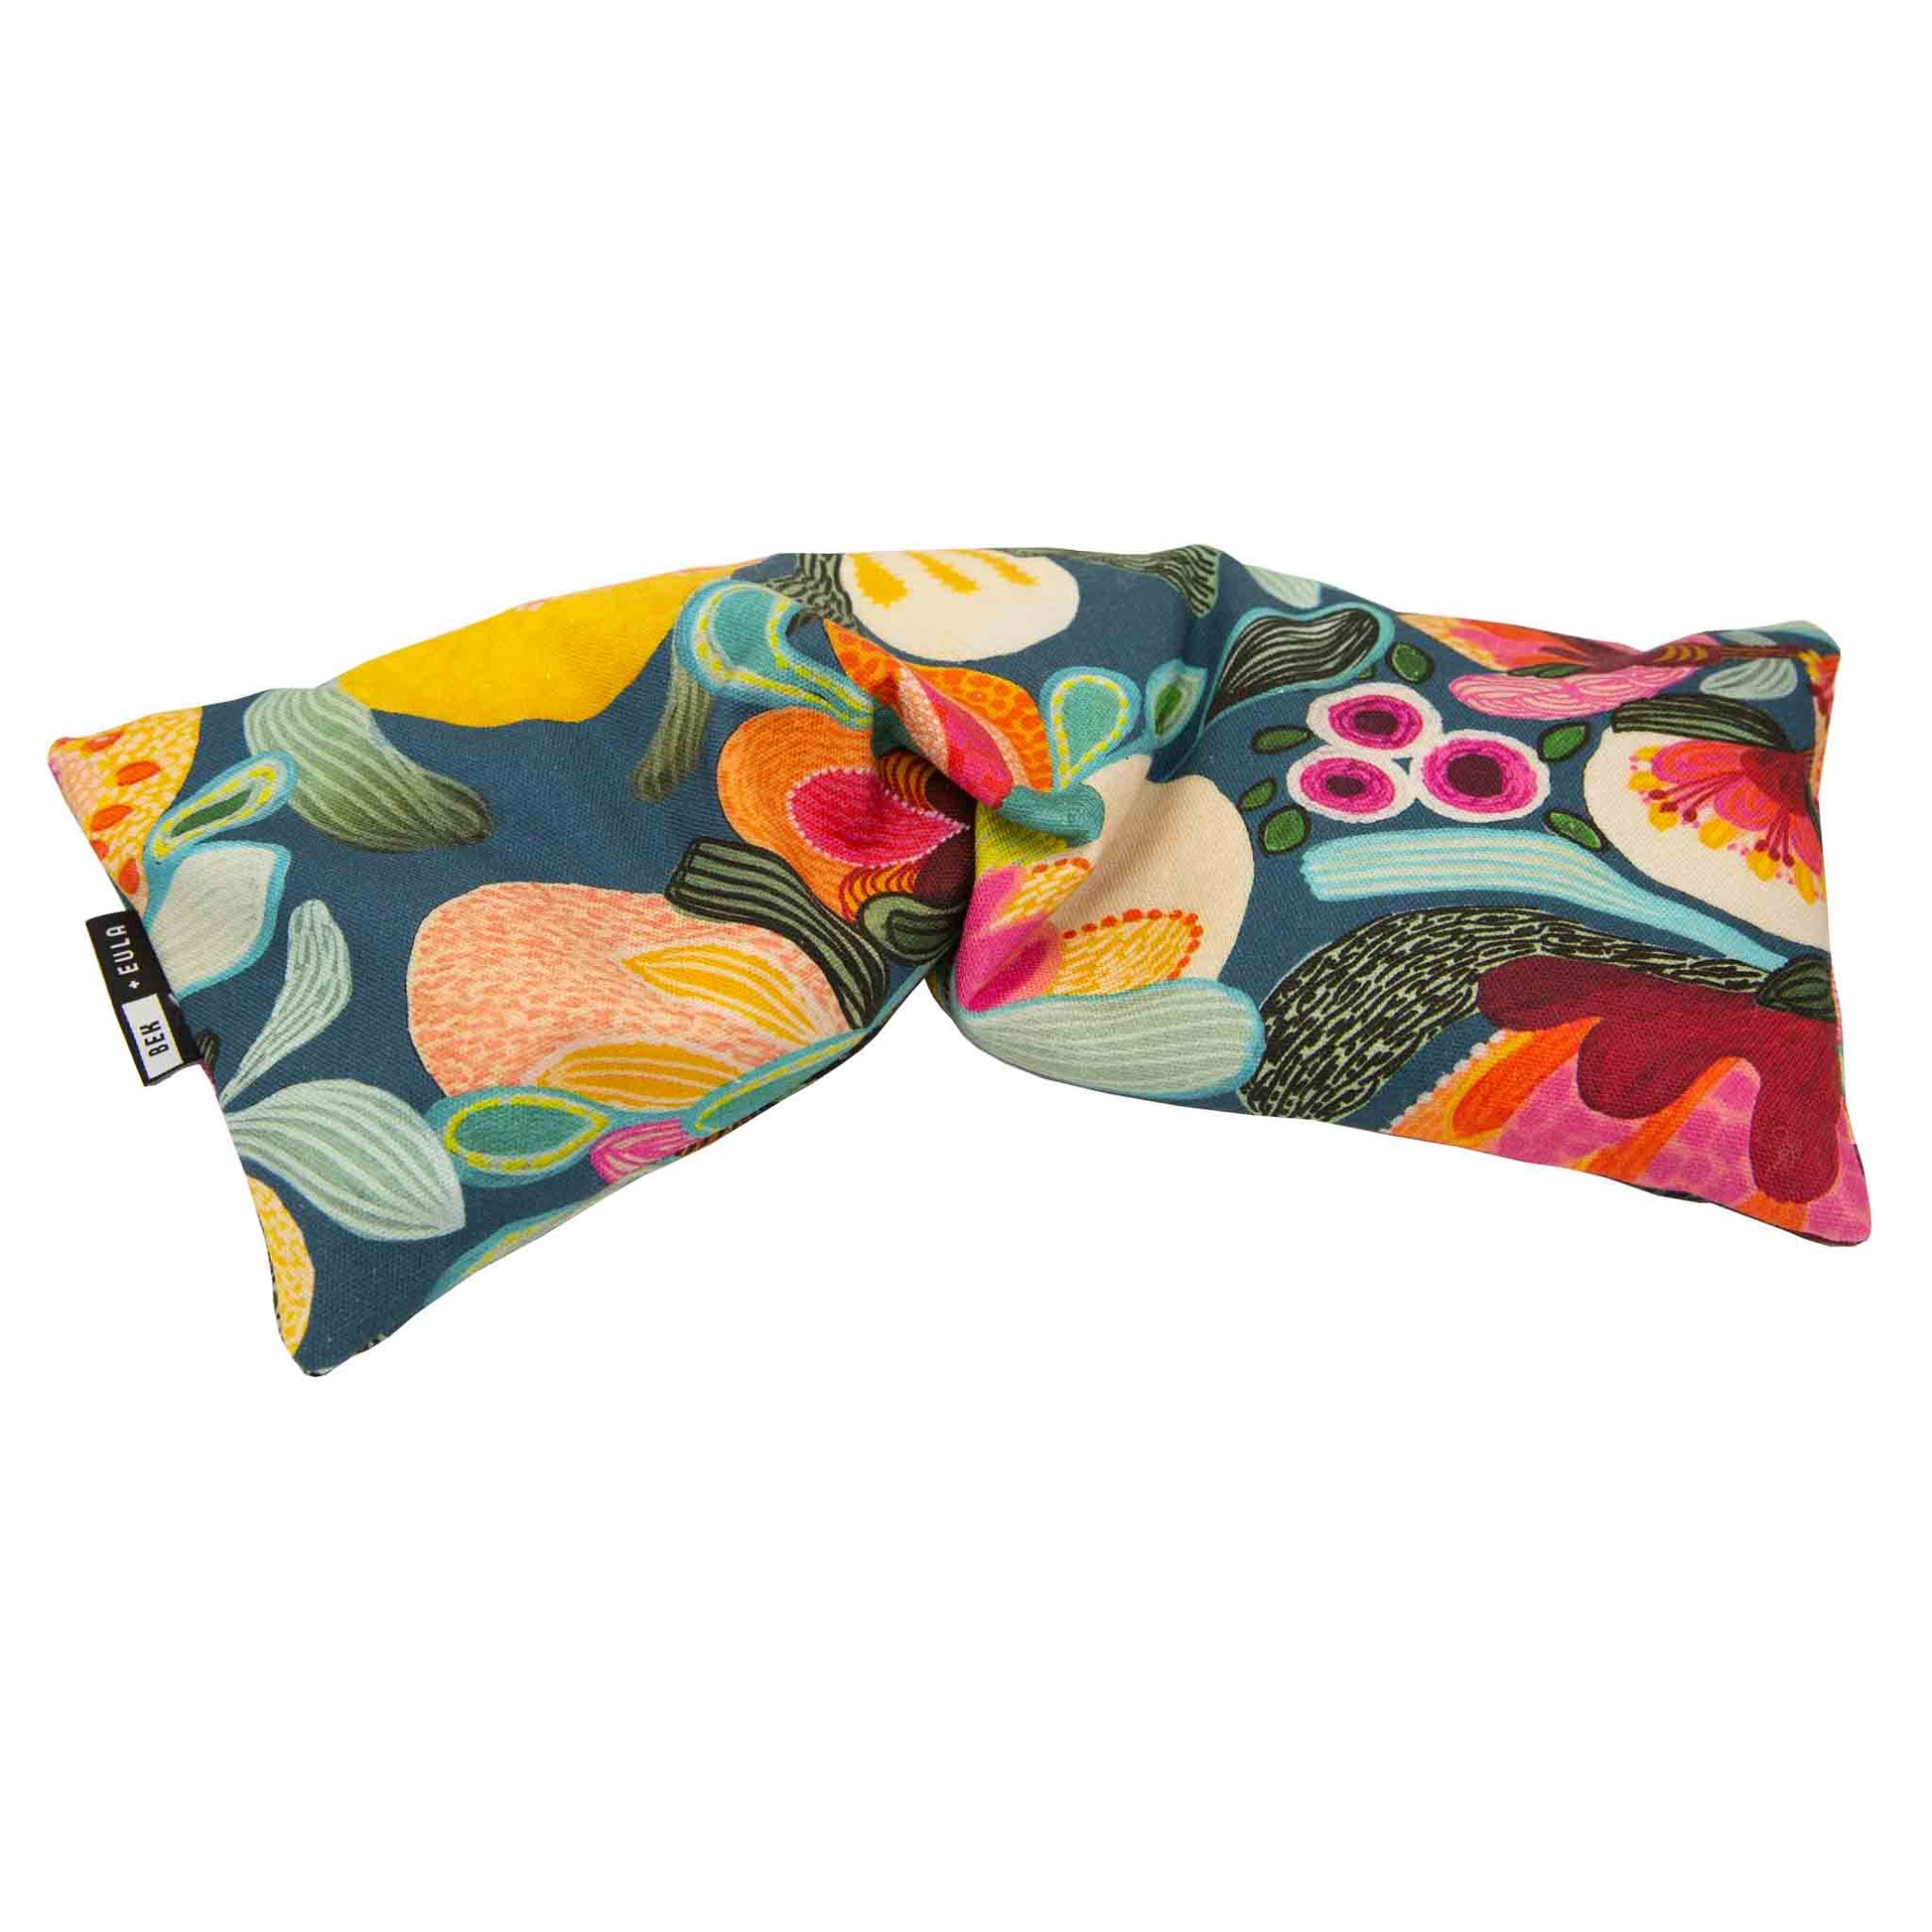 Wheat heat pack - Aussie flora print, removable cover